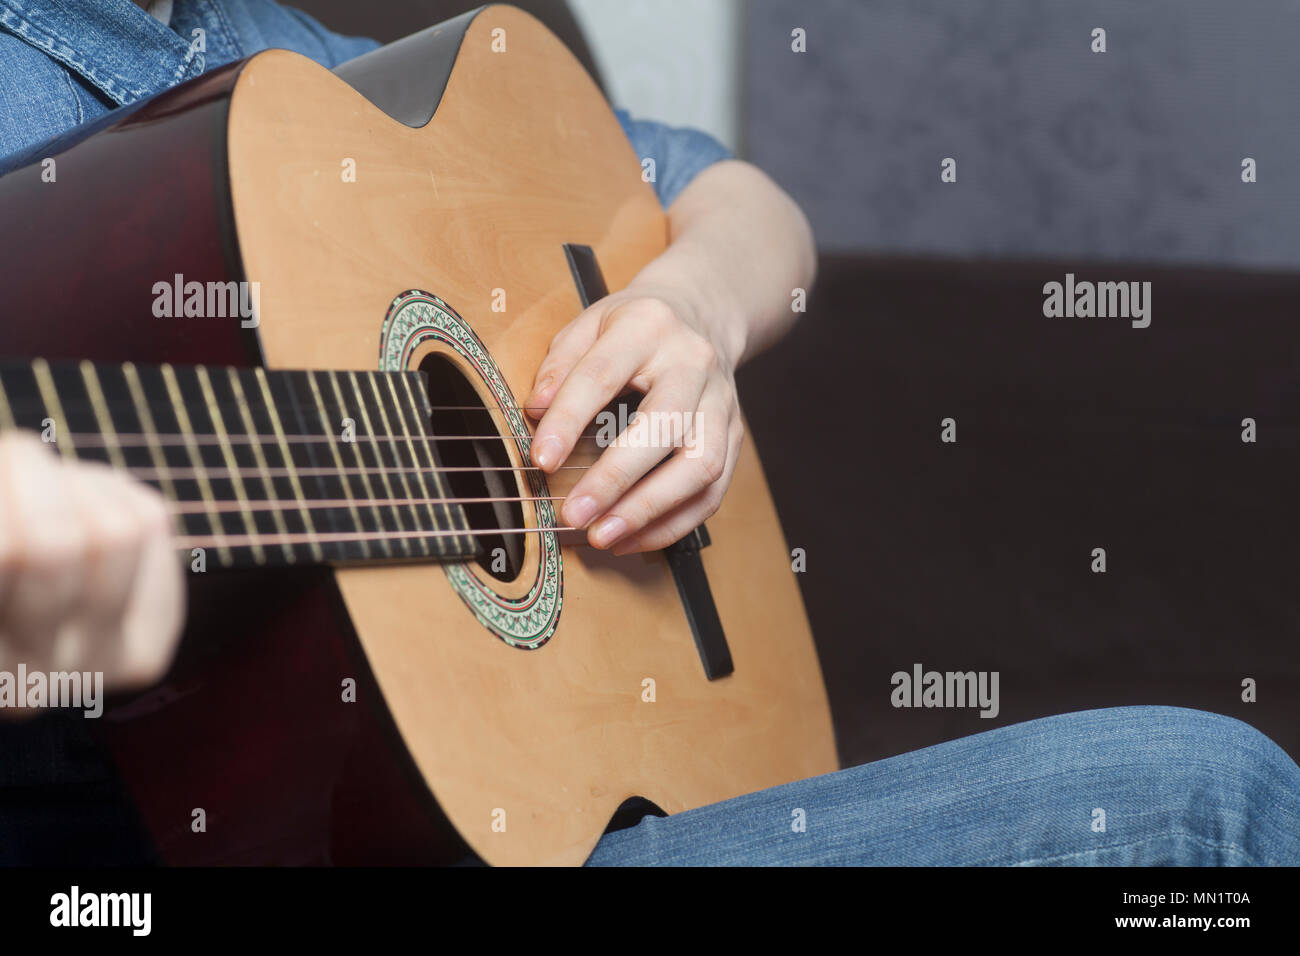 Young womans hands playing a acoustic classic guitar close-up Stock Photo